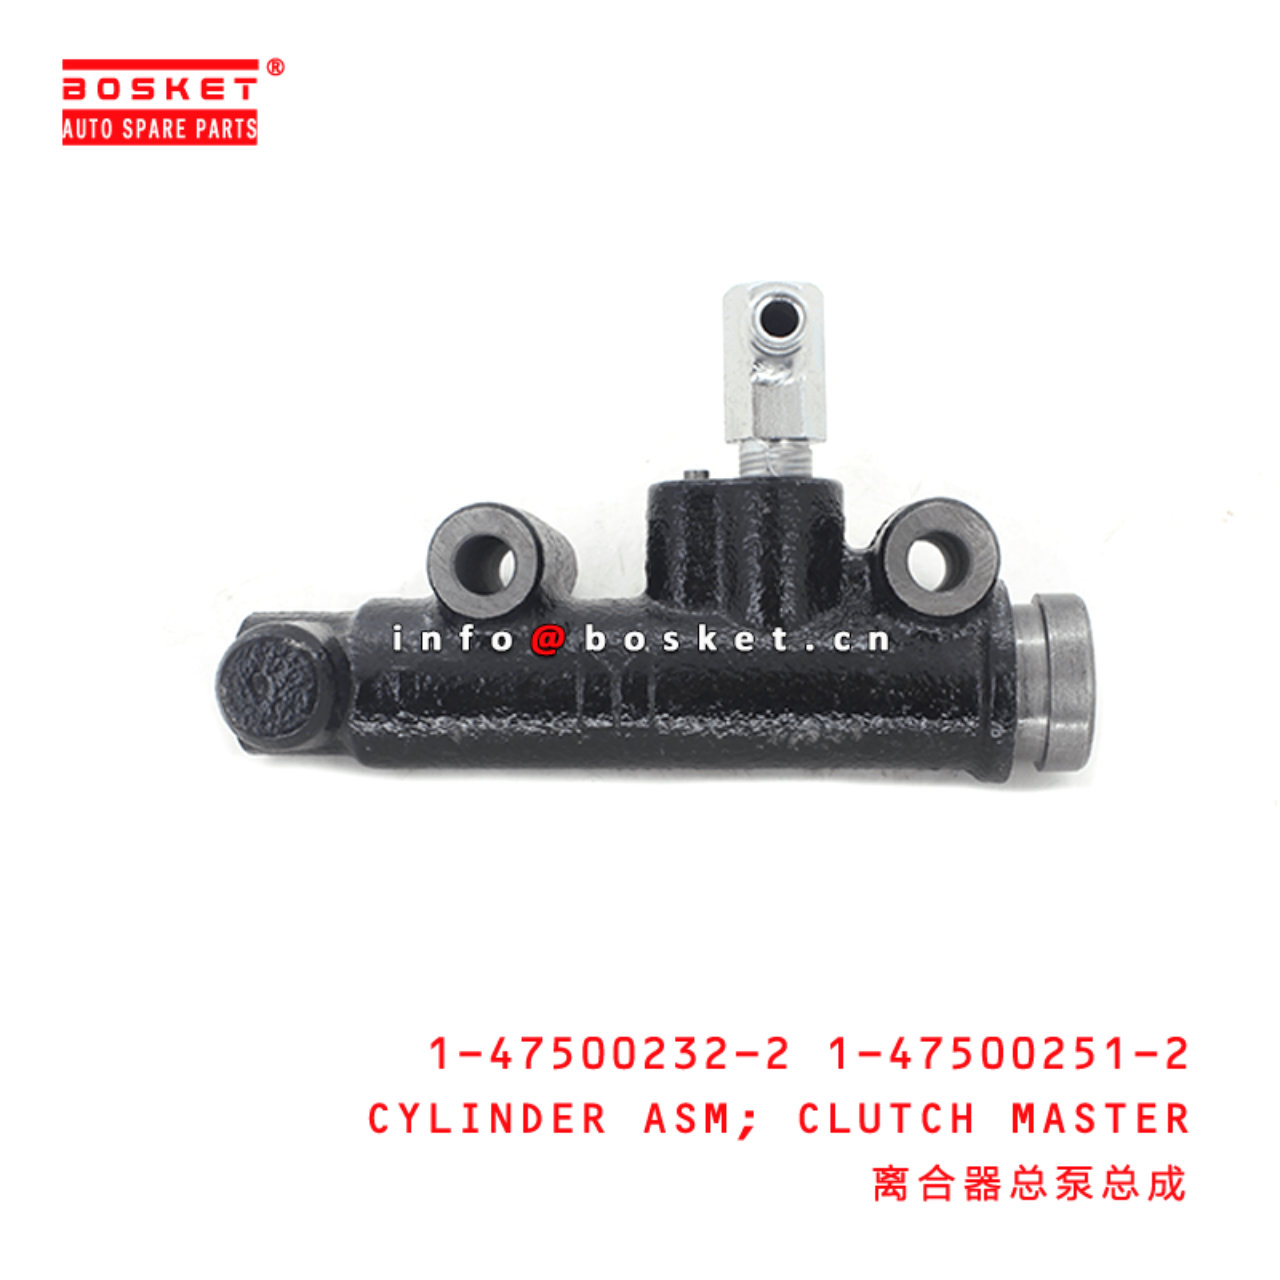 1-47500232-2 1-47500251-2 Clutch Master Cylinder Assembly 1475002322 1475002512 Suitable for ISUZU C